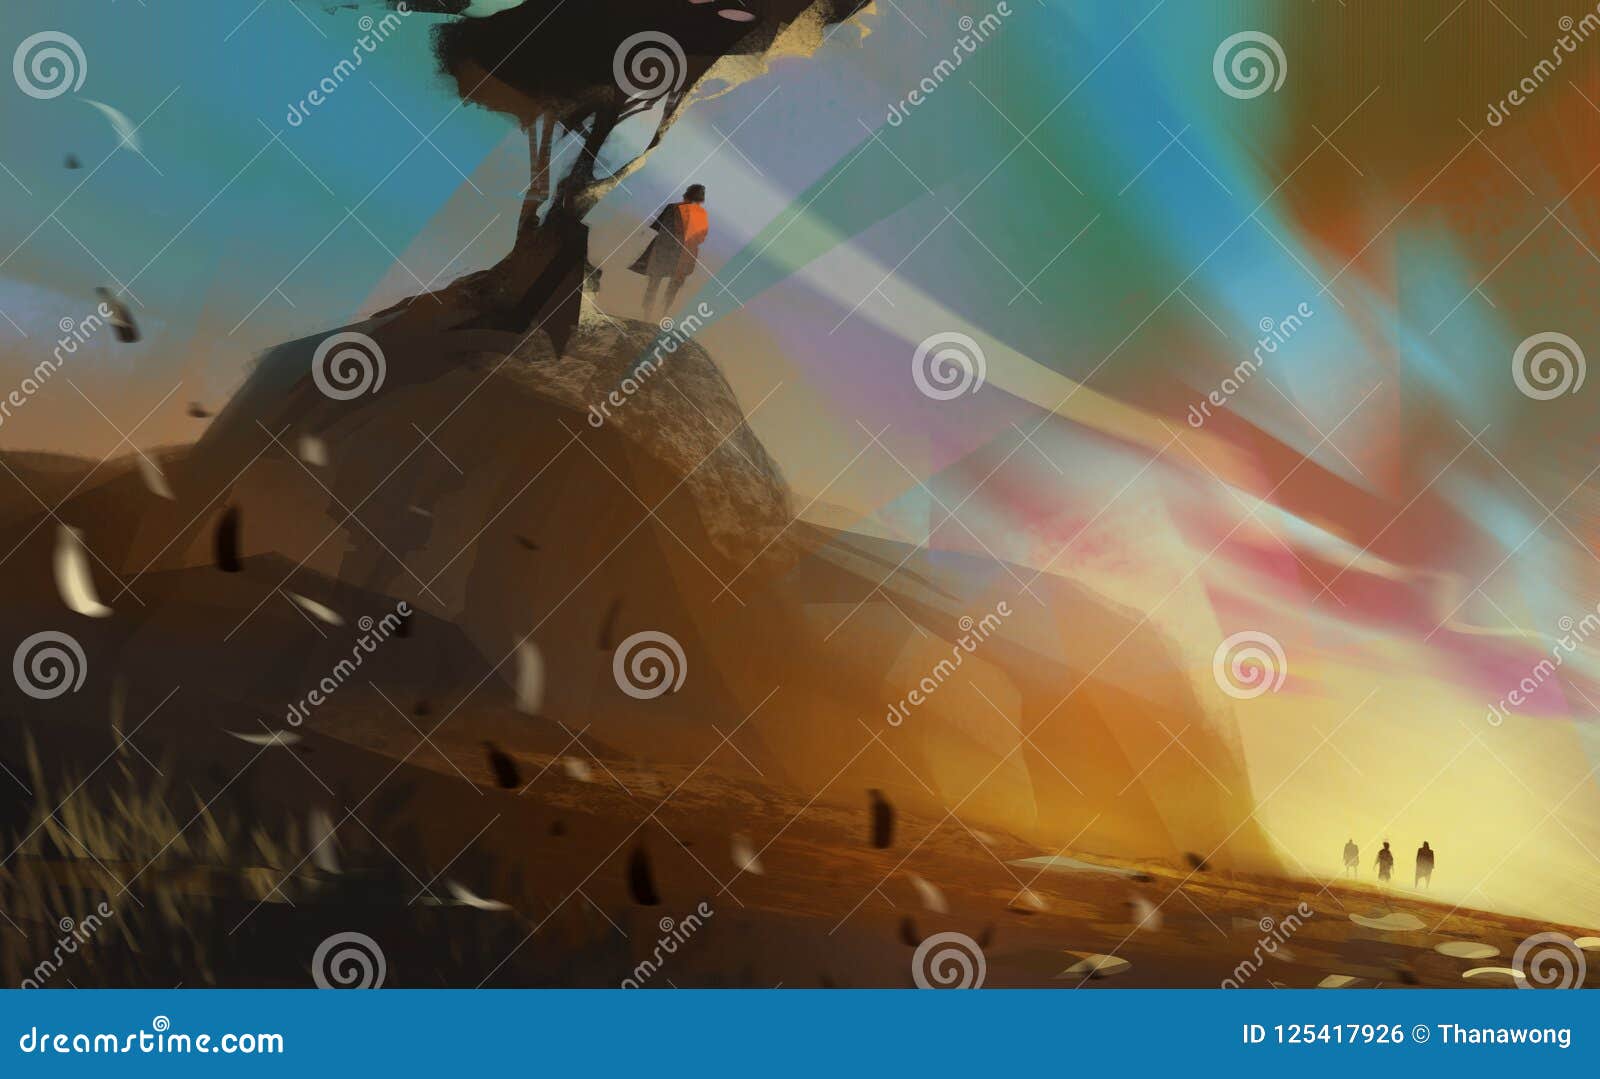 Man Standing On Hill Under A Big Tree In Sunset, Digital ...